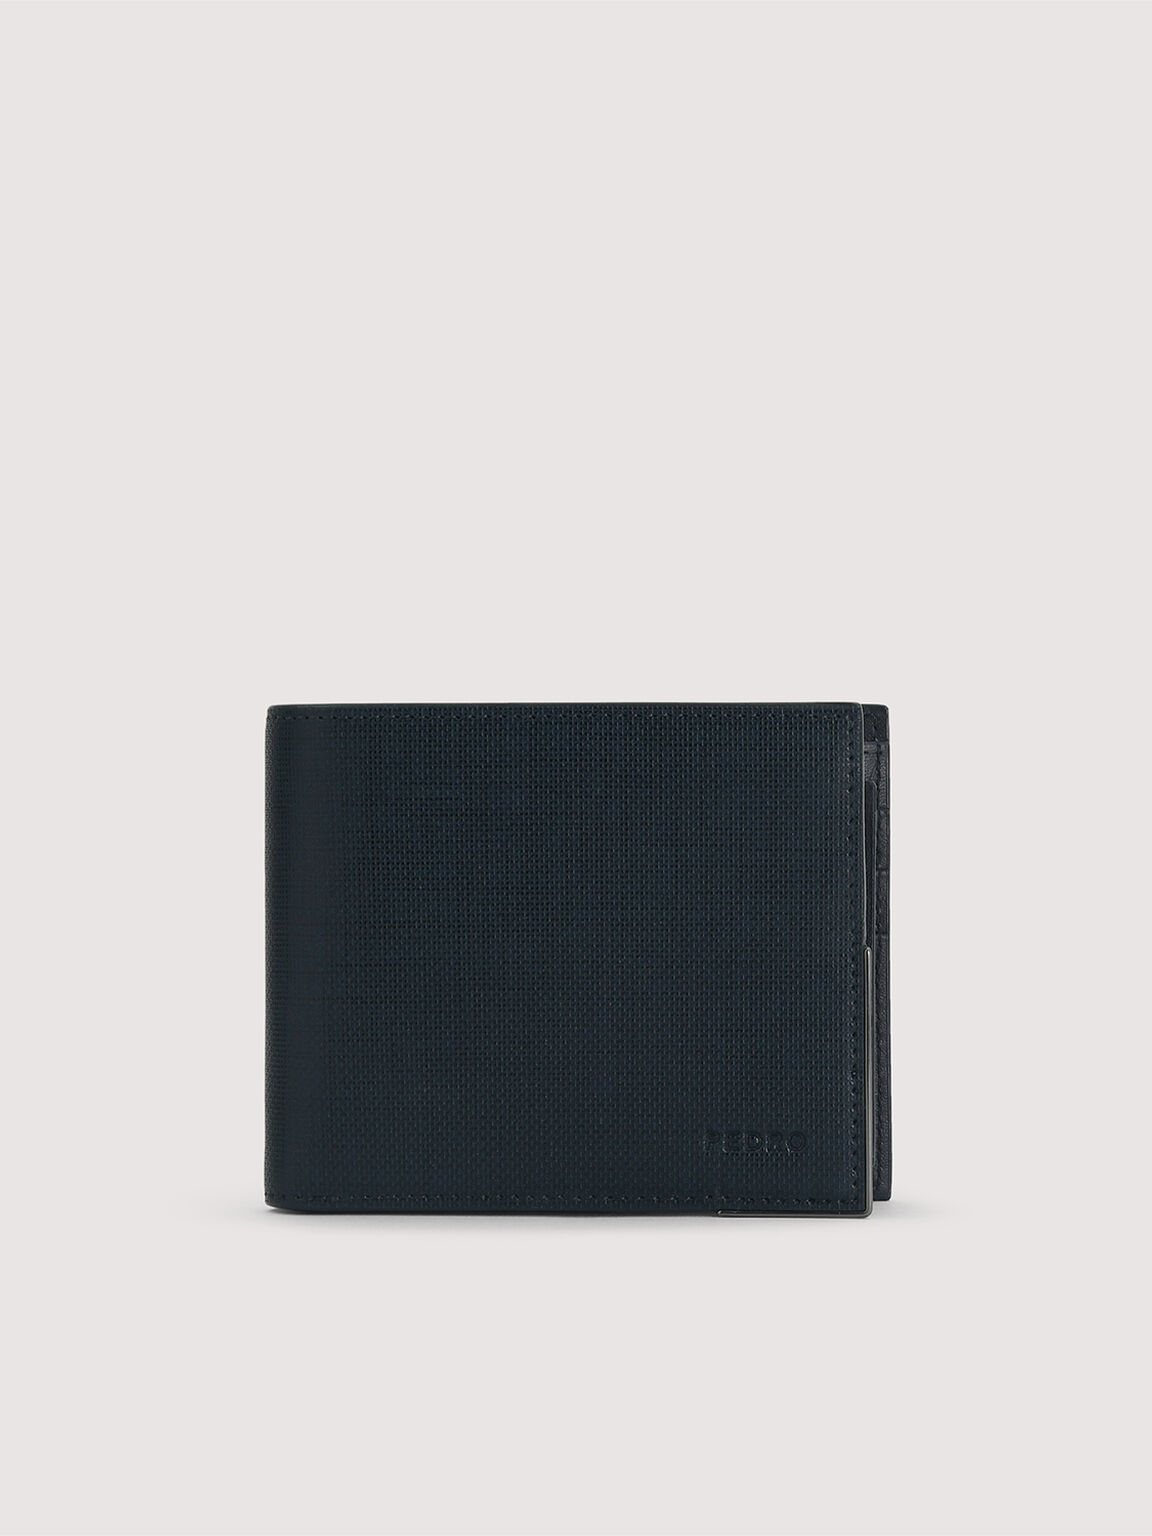 Leather Bi-Fold with Insert, Navy